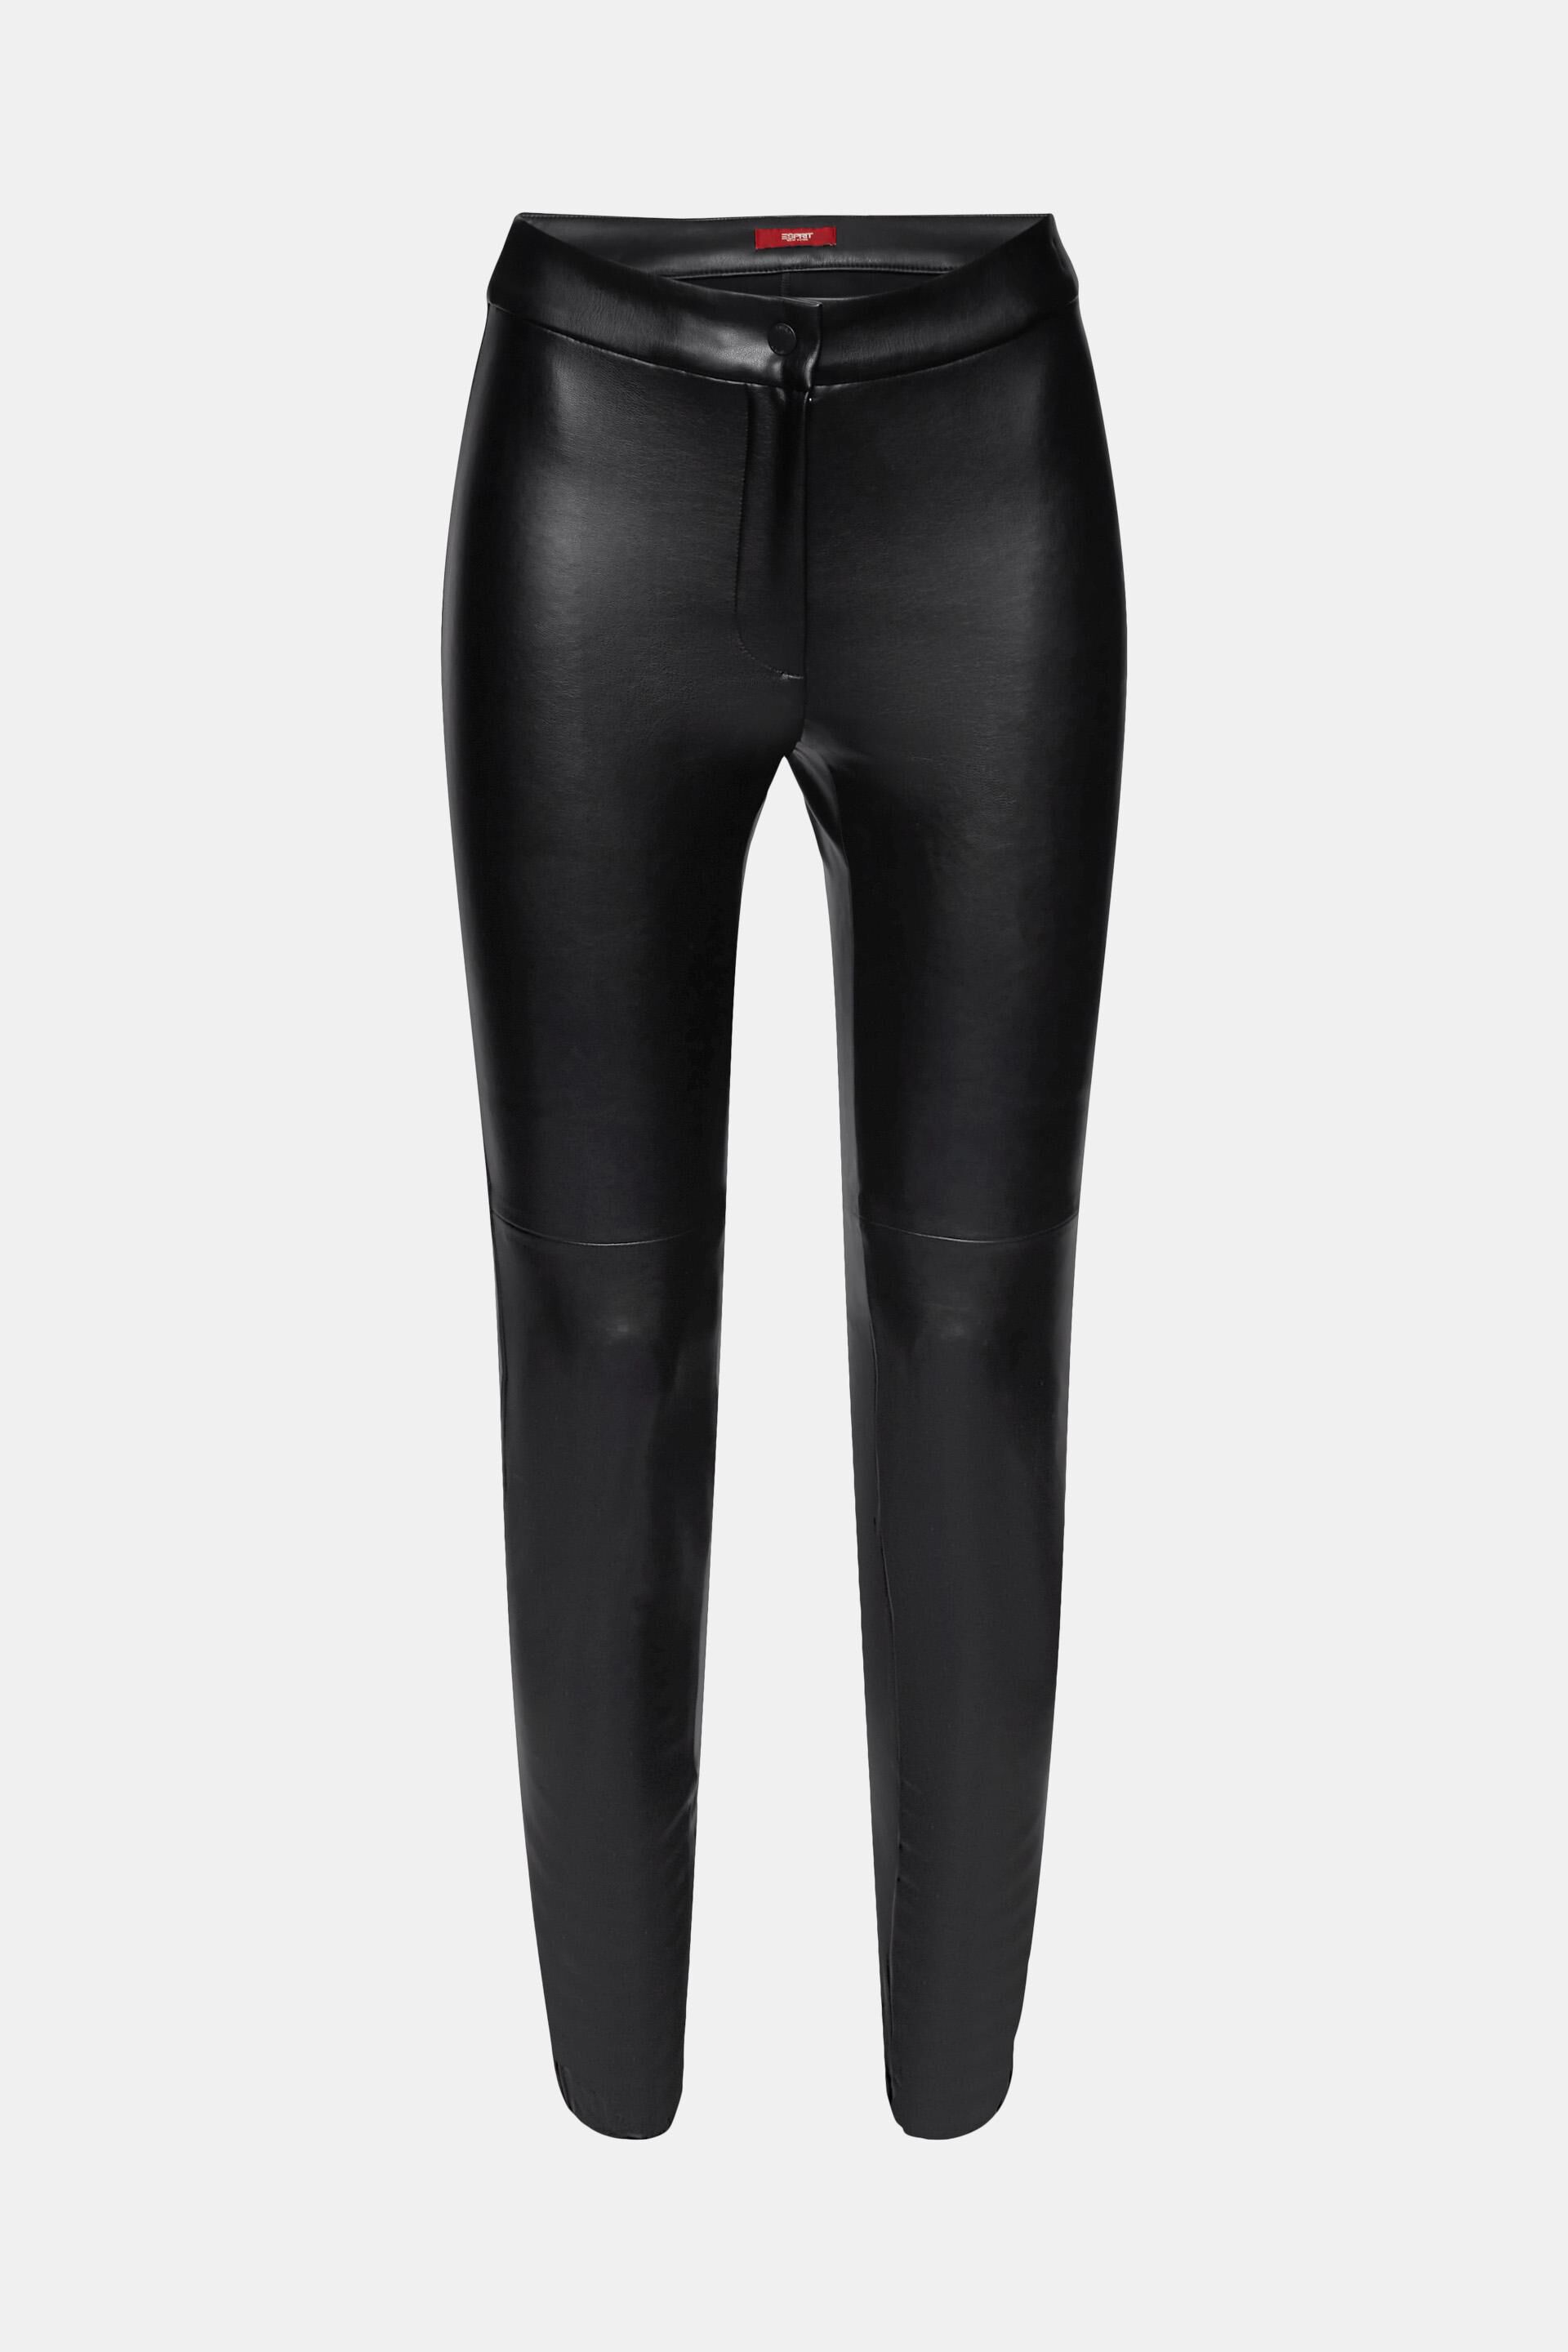 Leather trousers Burberry Black size 6 UK in Leather - 30200181